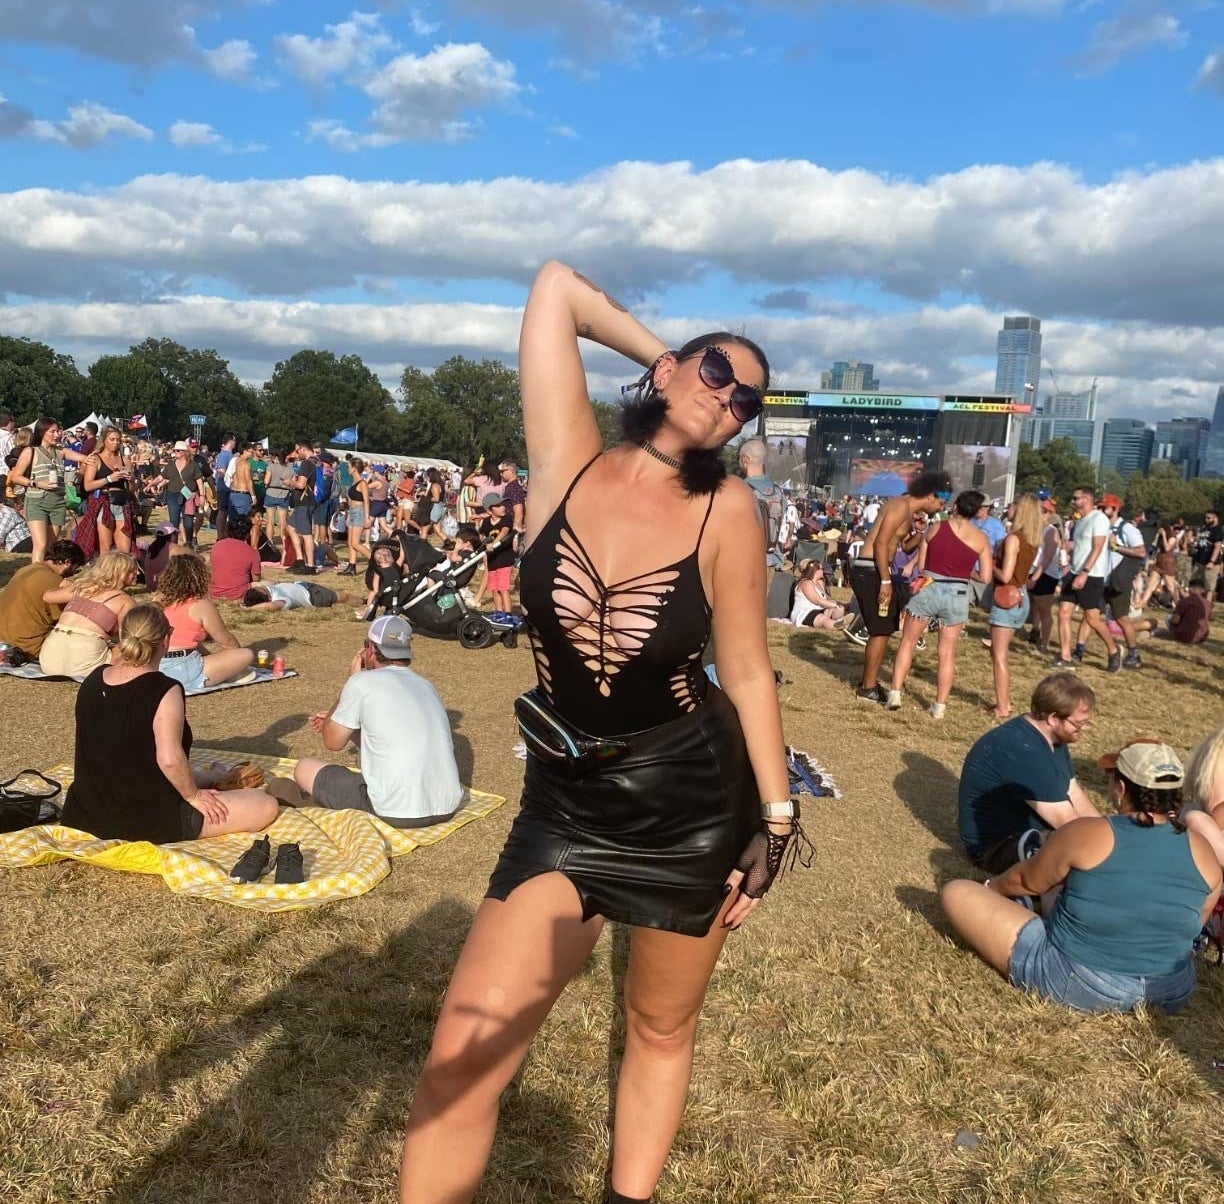 reviewer wearing the black skirt at a music festival